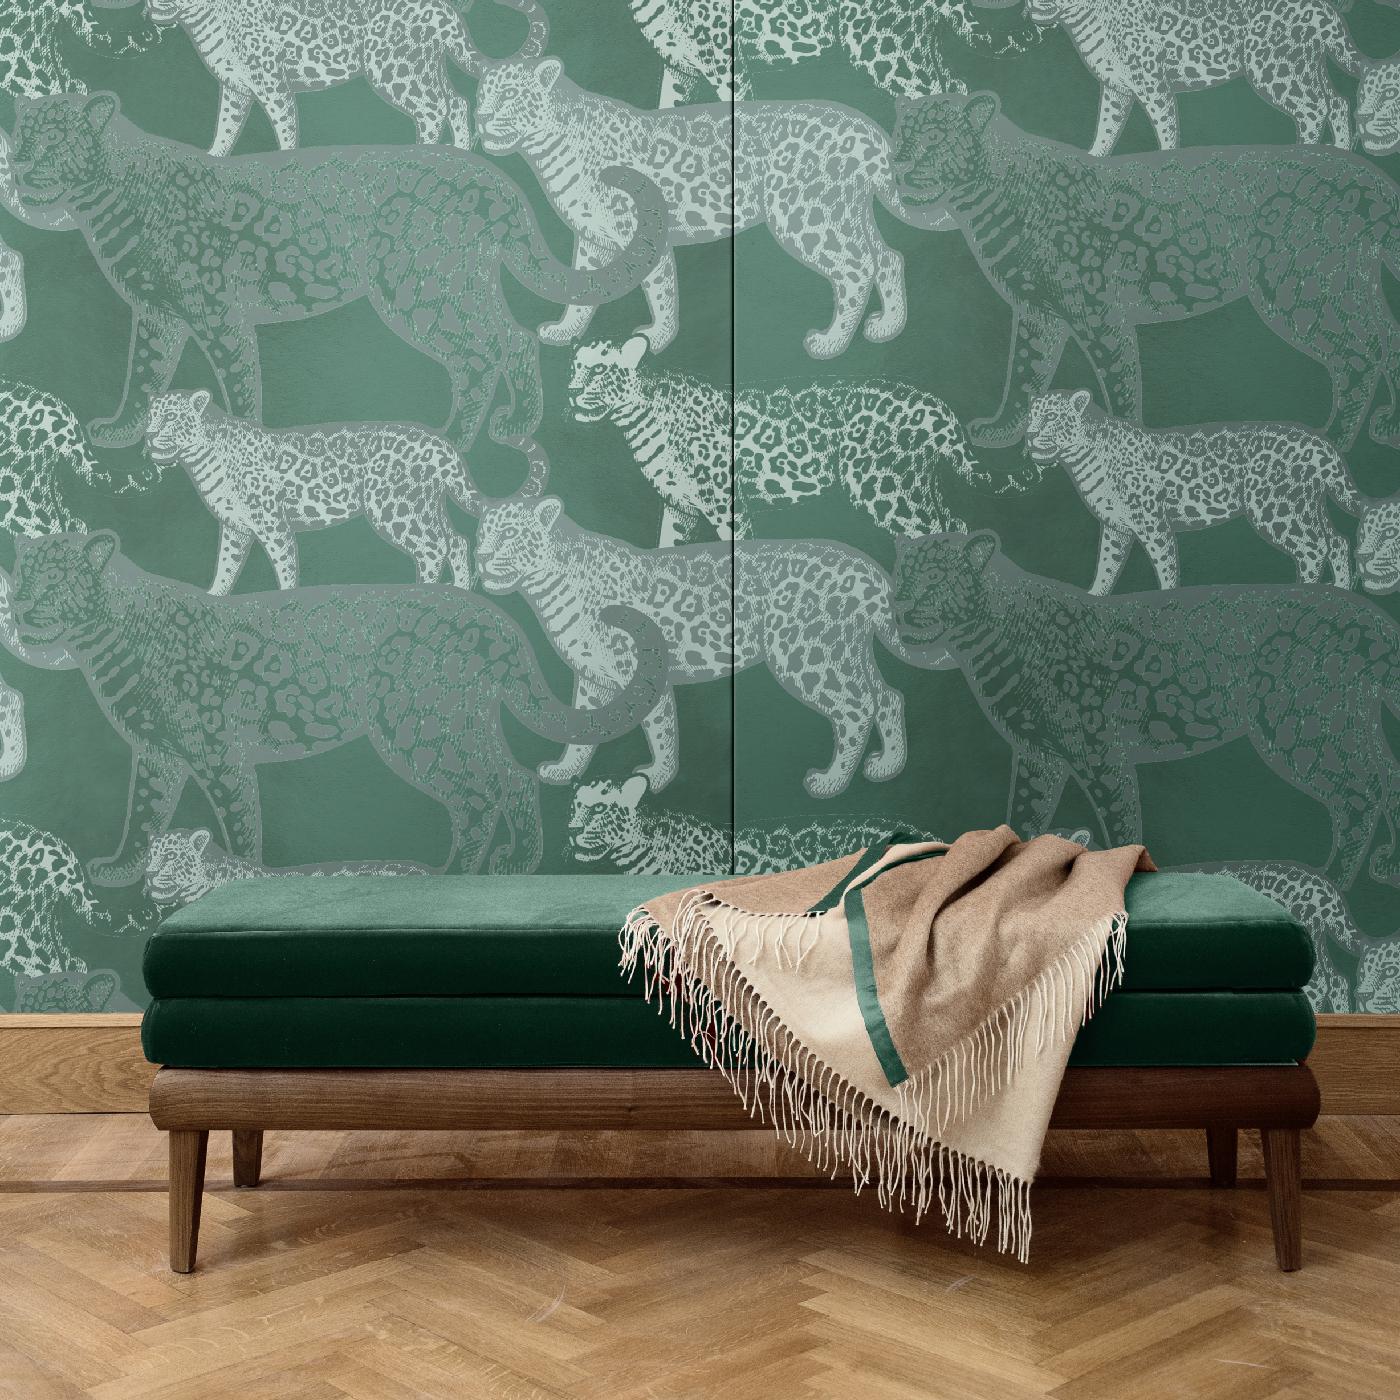 Alternating three different versions of leopards, finely depicted as they walk over a dark background, this wall covering is a bold and sophisticated choice for a modern interior. Its mesmerizing quality will make a statement in any room in the